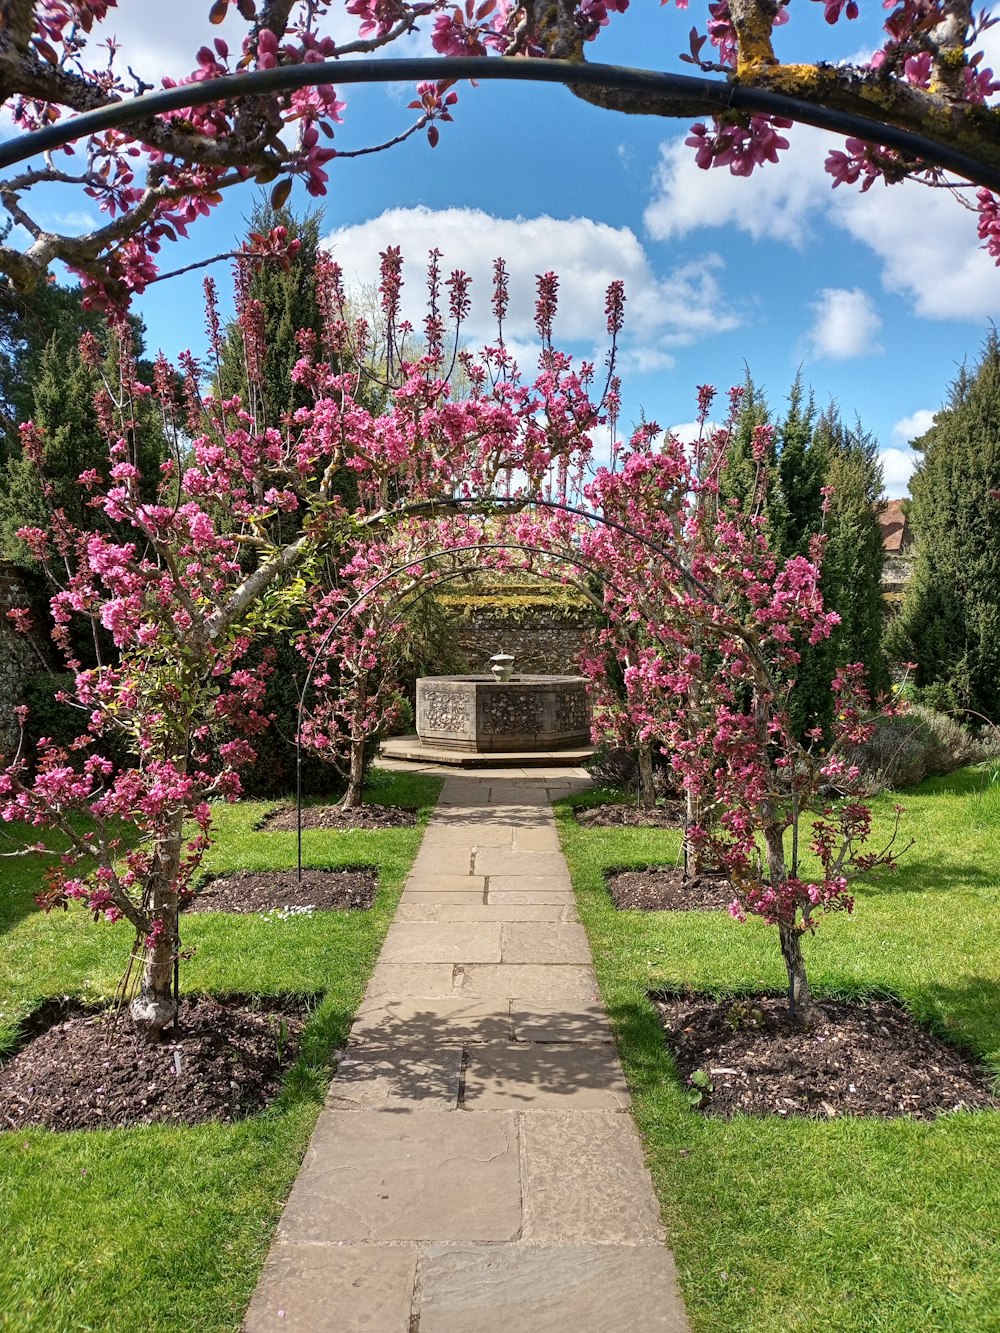 a path through a garden with pink flowers